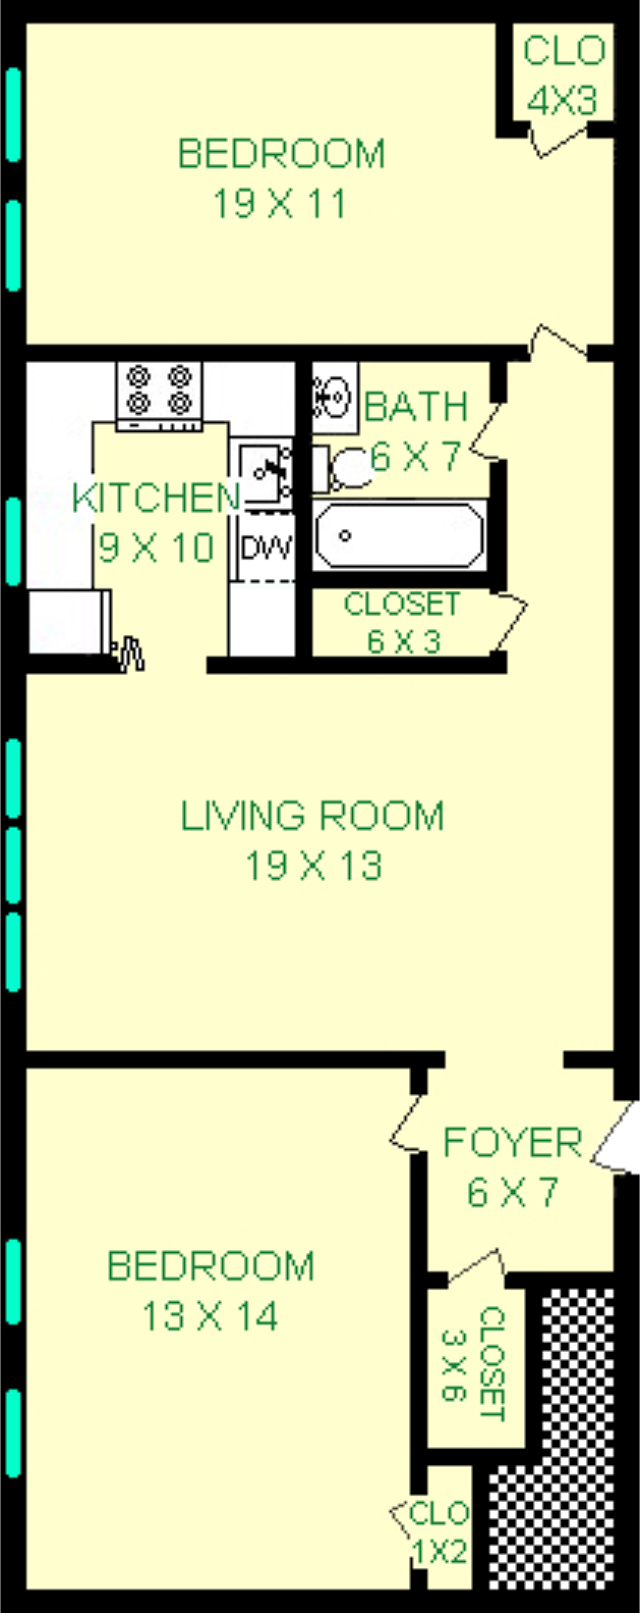 Hulton Two bedroom unit shows roughly 912 square feet, with two bedrooms, a living room, kitchen and bathroom.